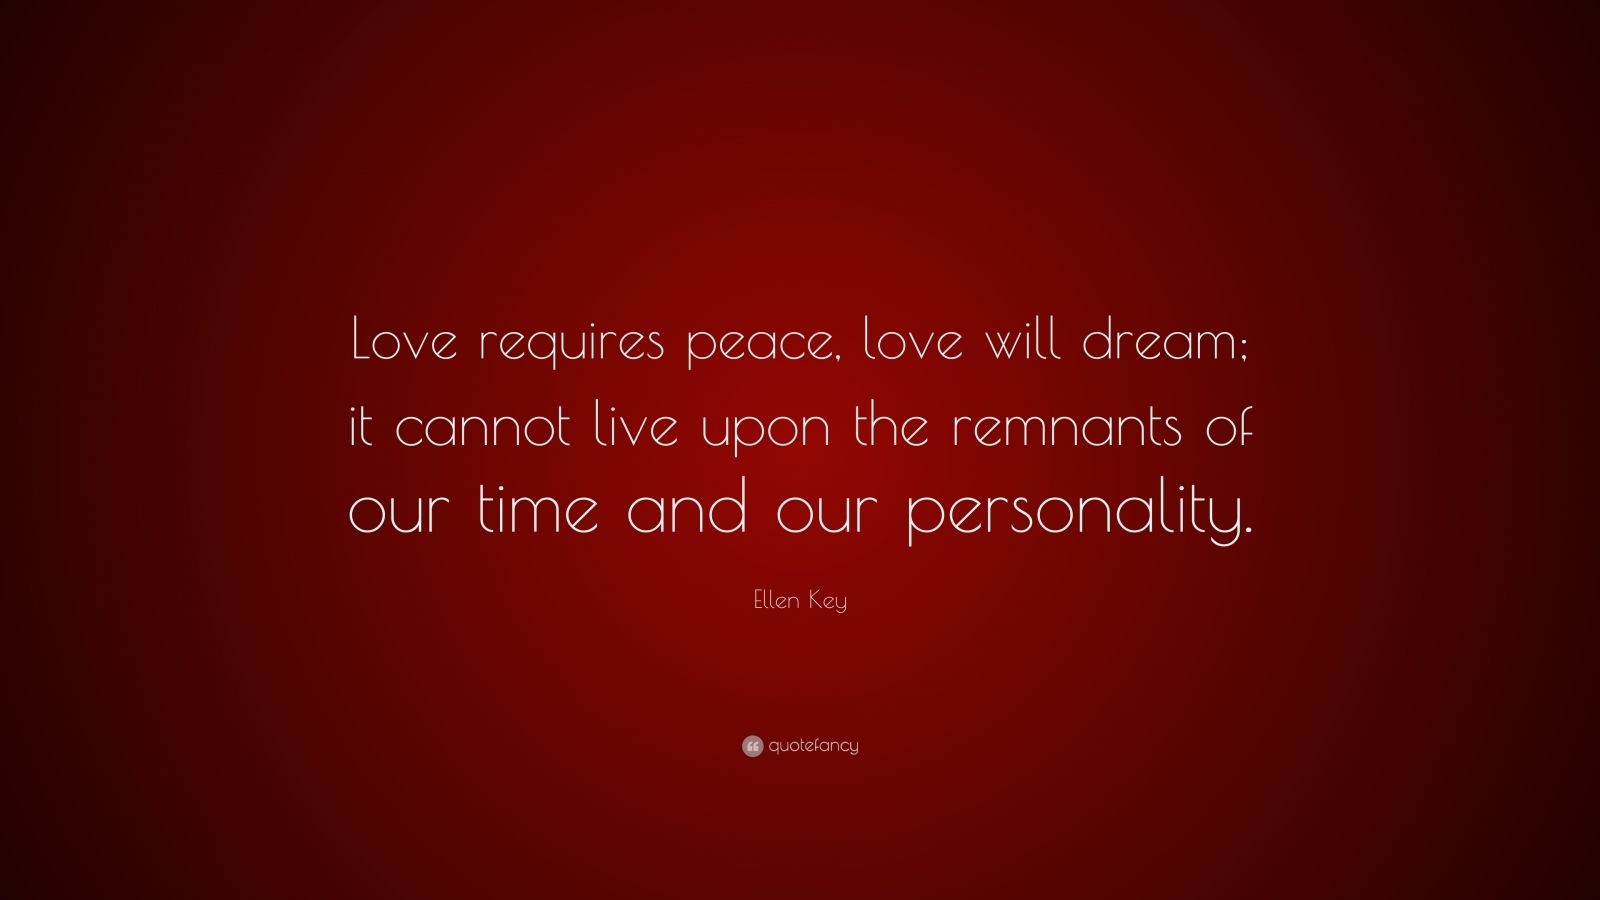 Ellen Key Quote: “Love requires peace, love will dream; it cannot